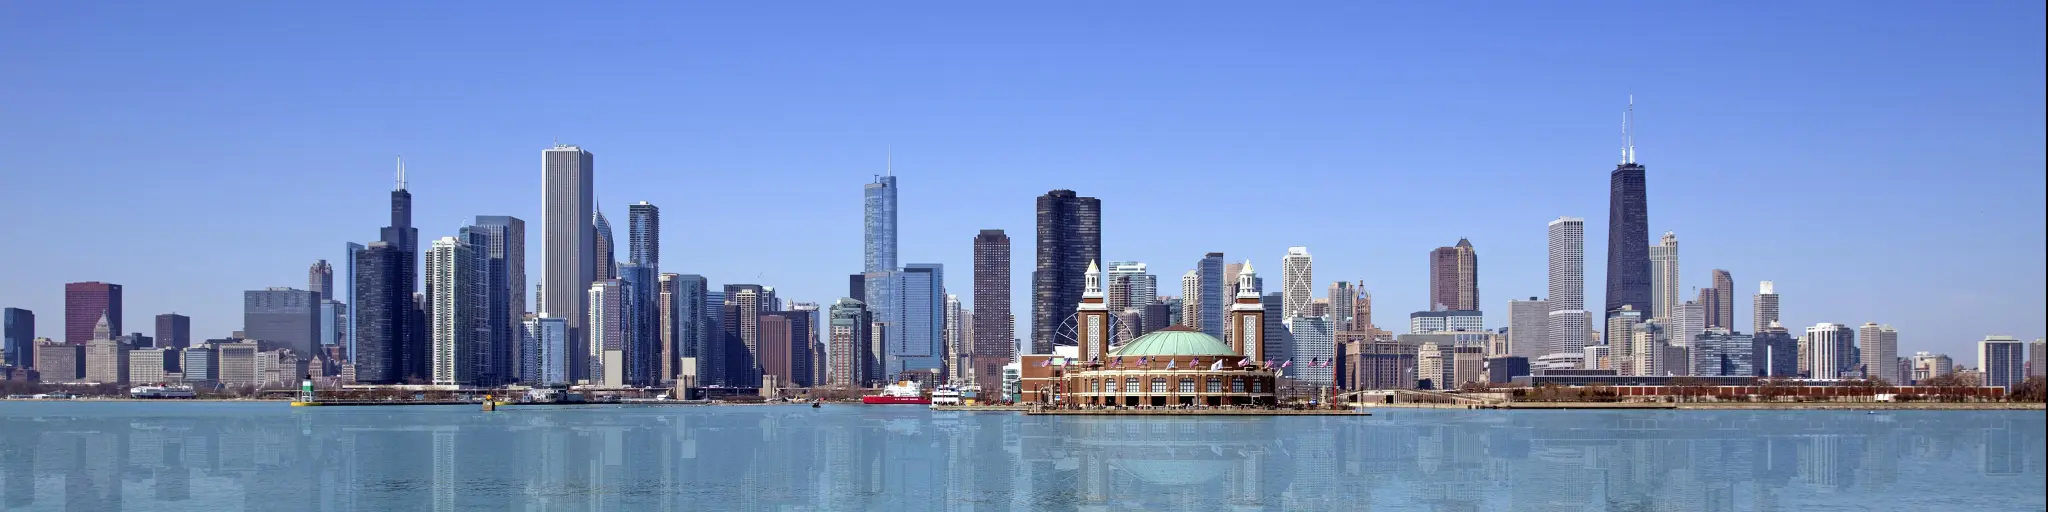 Chicago, USA with the city skyline against a blue sky with water in the forehand. 